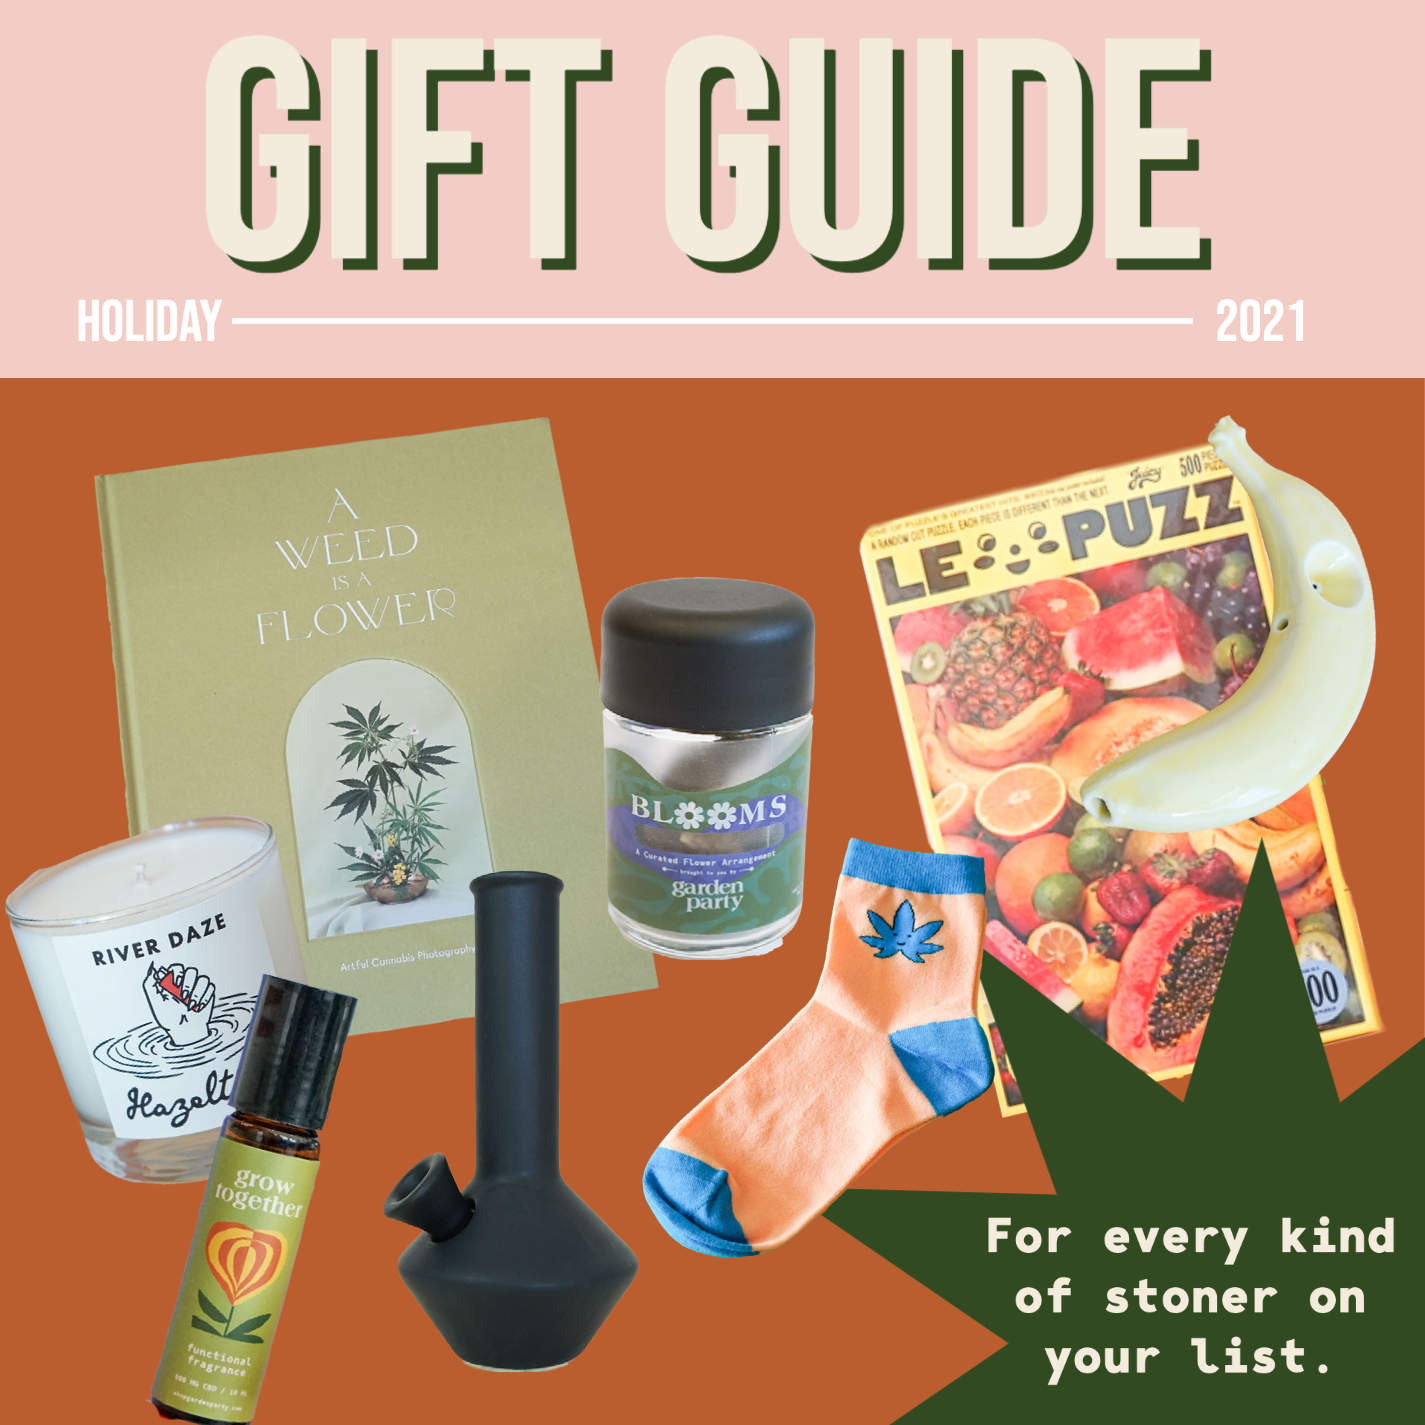 Garden Party Holiday Gift Guide 2021